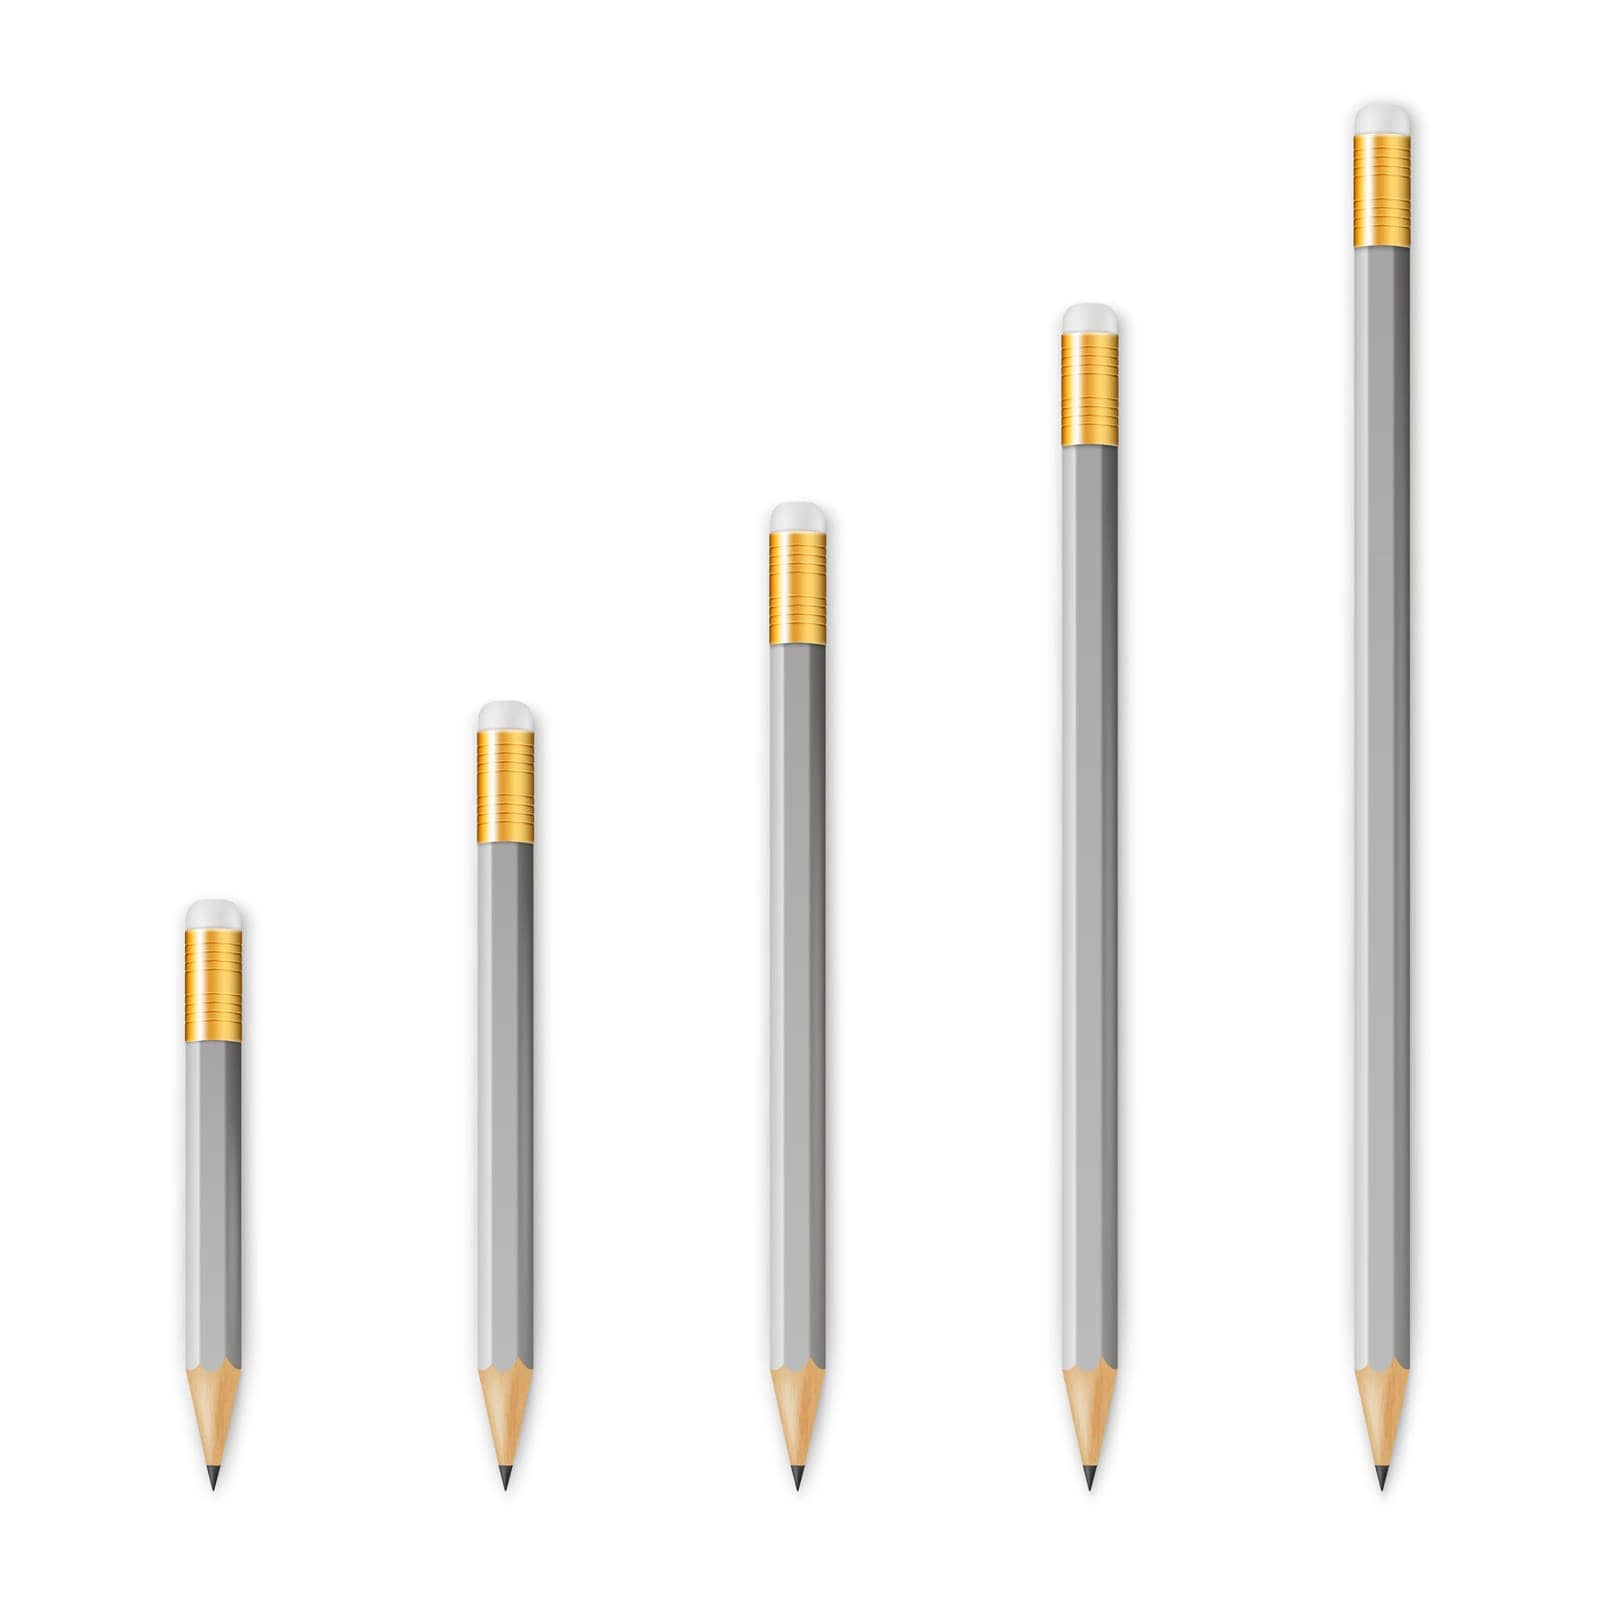 Gray wooden sharp pencils by Gomolach